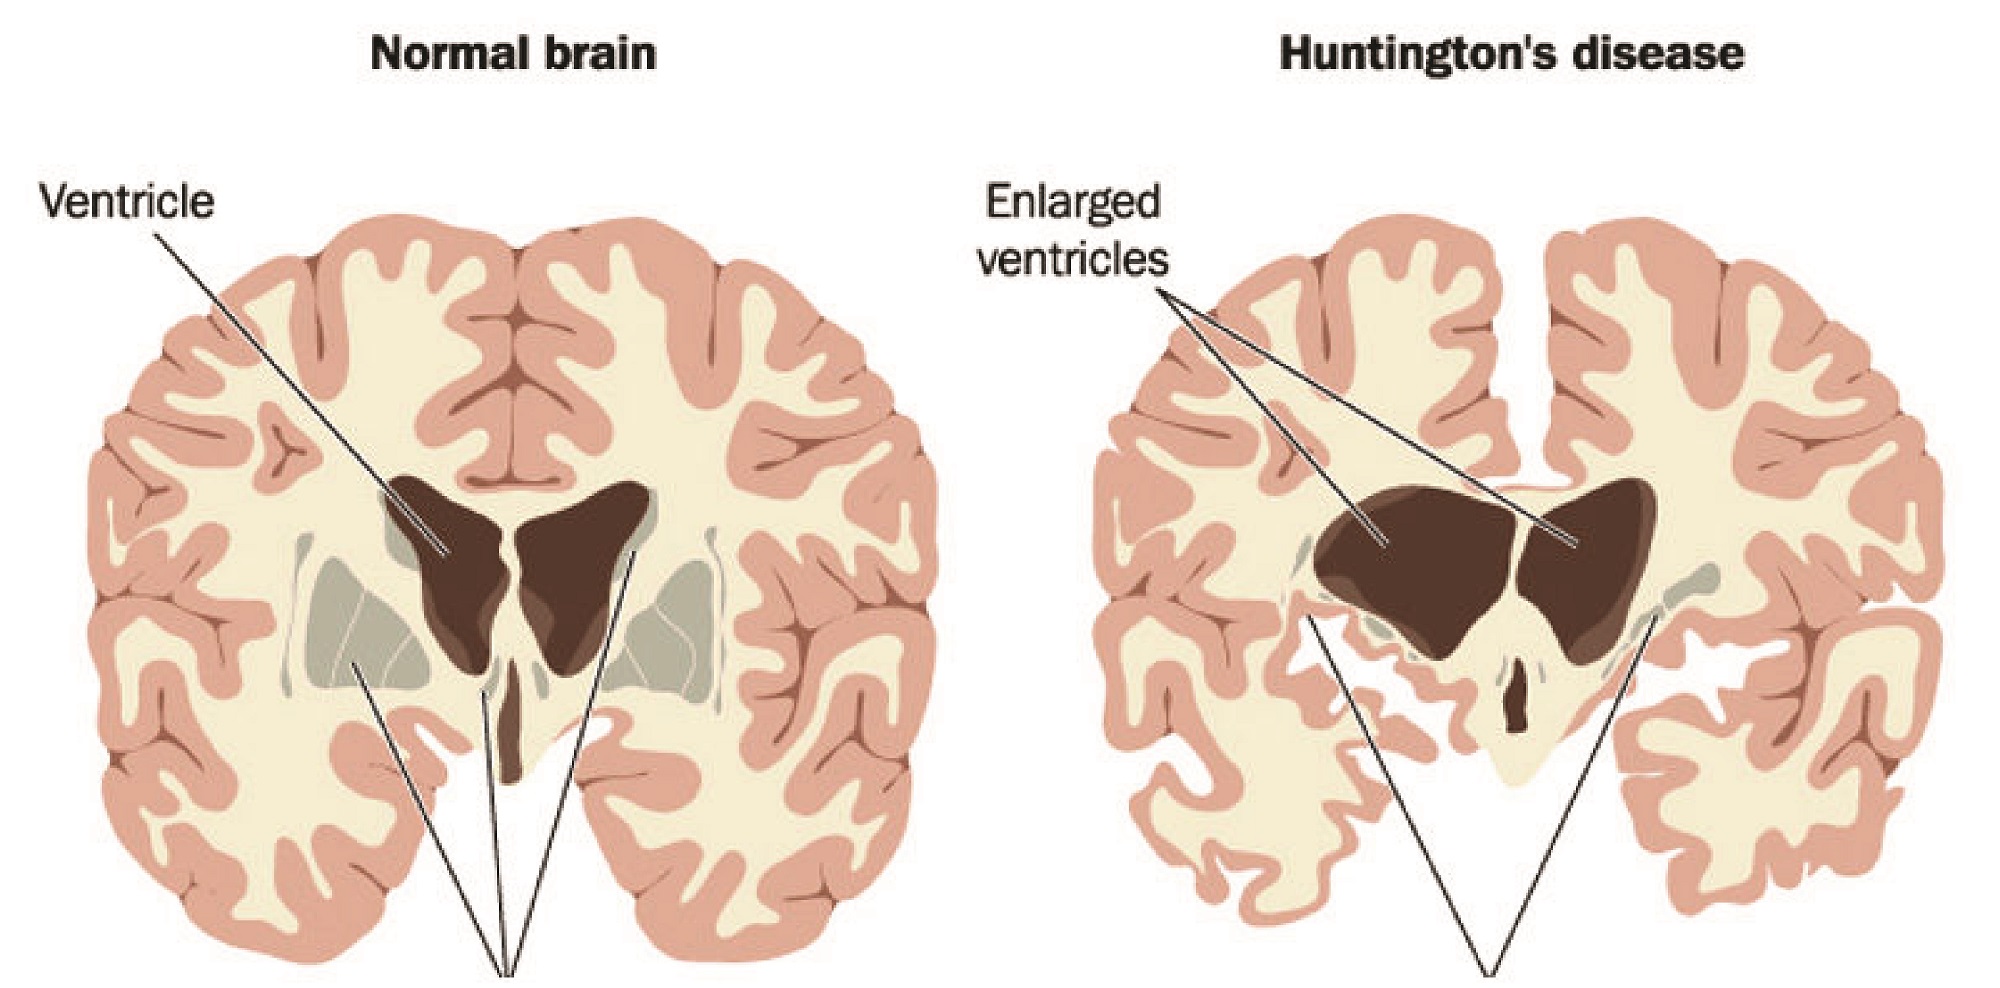 What are the Signs and Symptoms of Huntington’s Disease